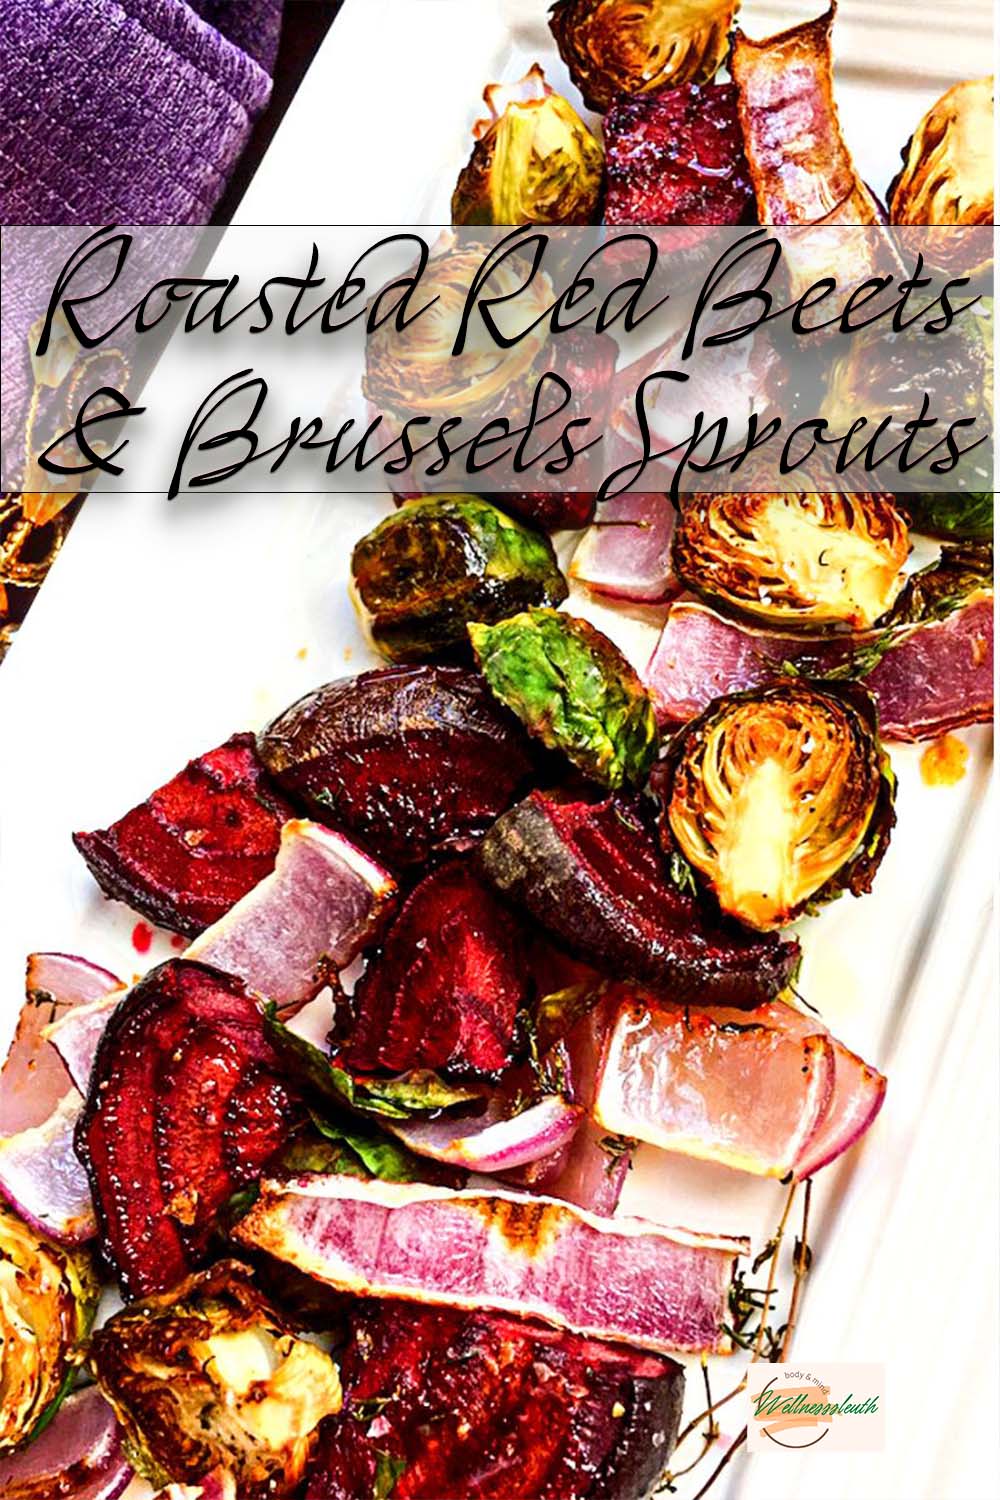 Roasted Red Beets & Brussels Sprouts